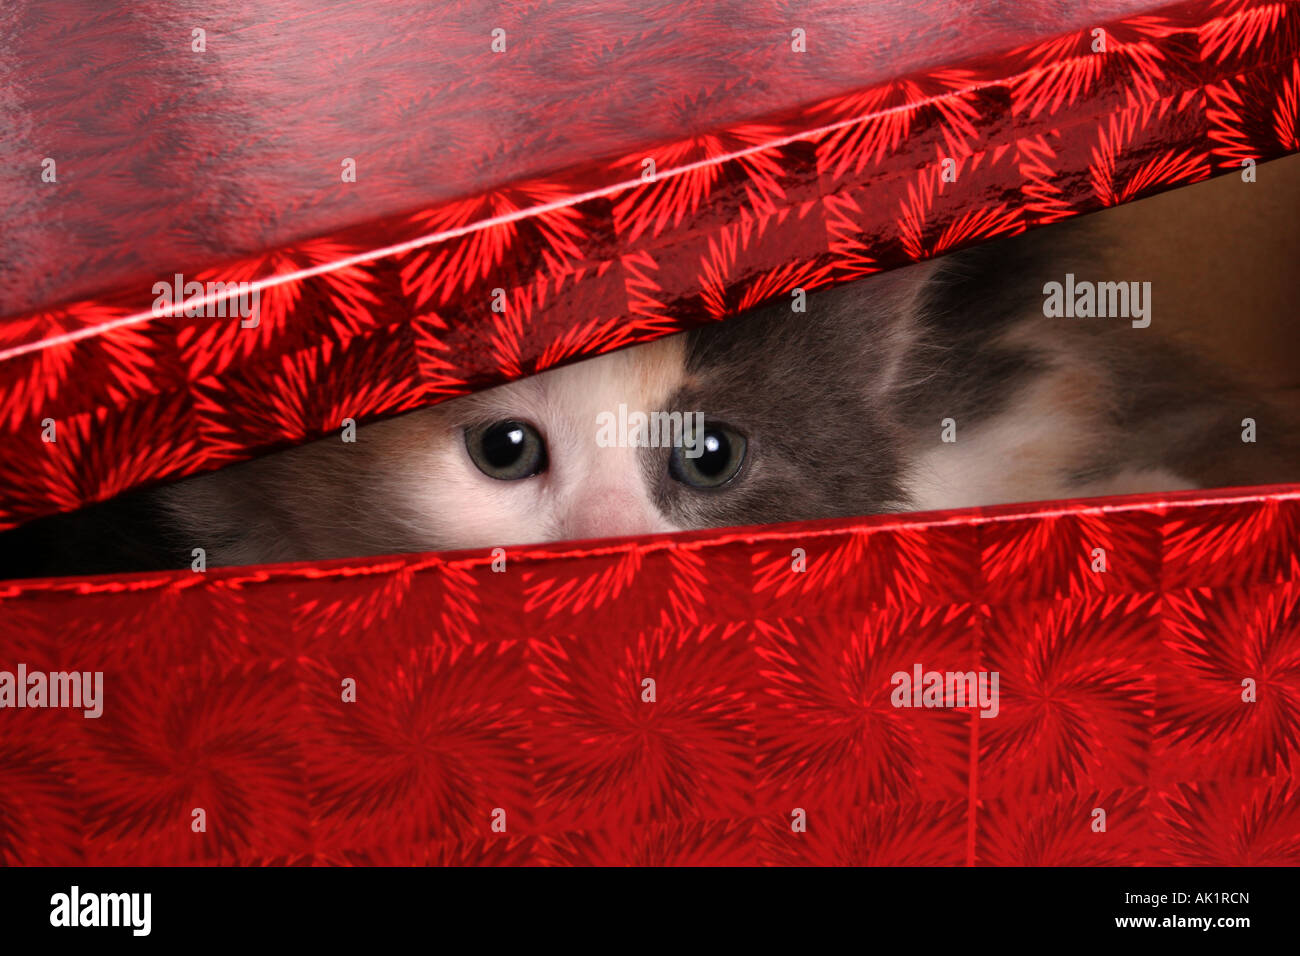 A Calico Kitten about 6 weeks old inside a red Christmas Gift given as a present to a young child Stock Photo